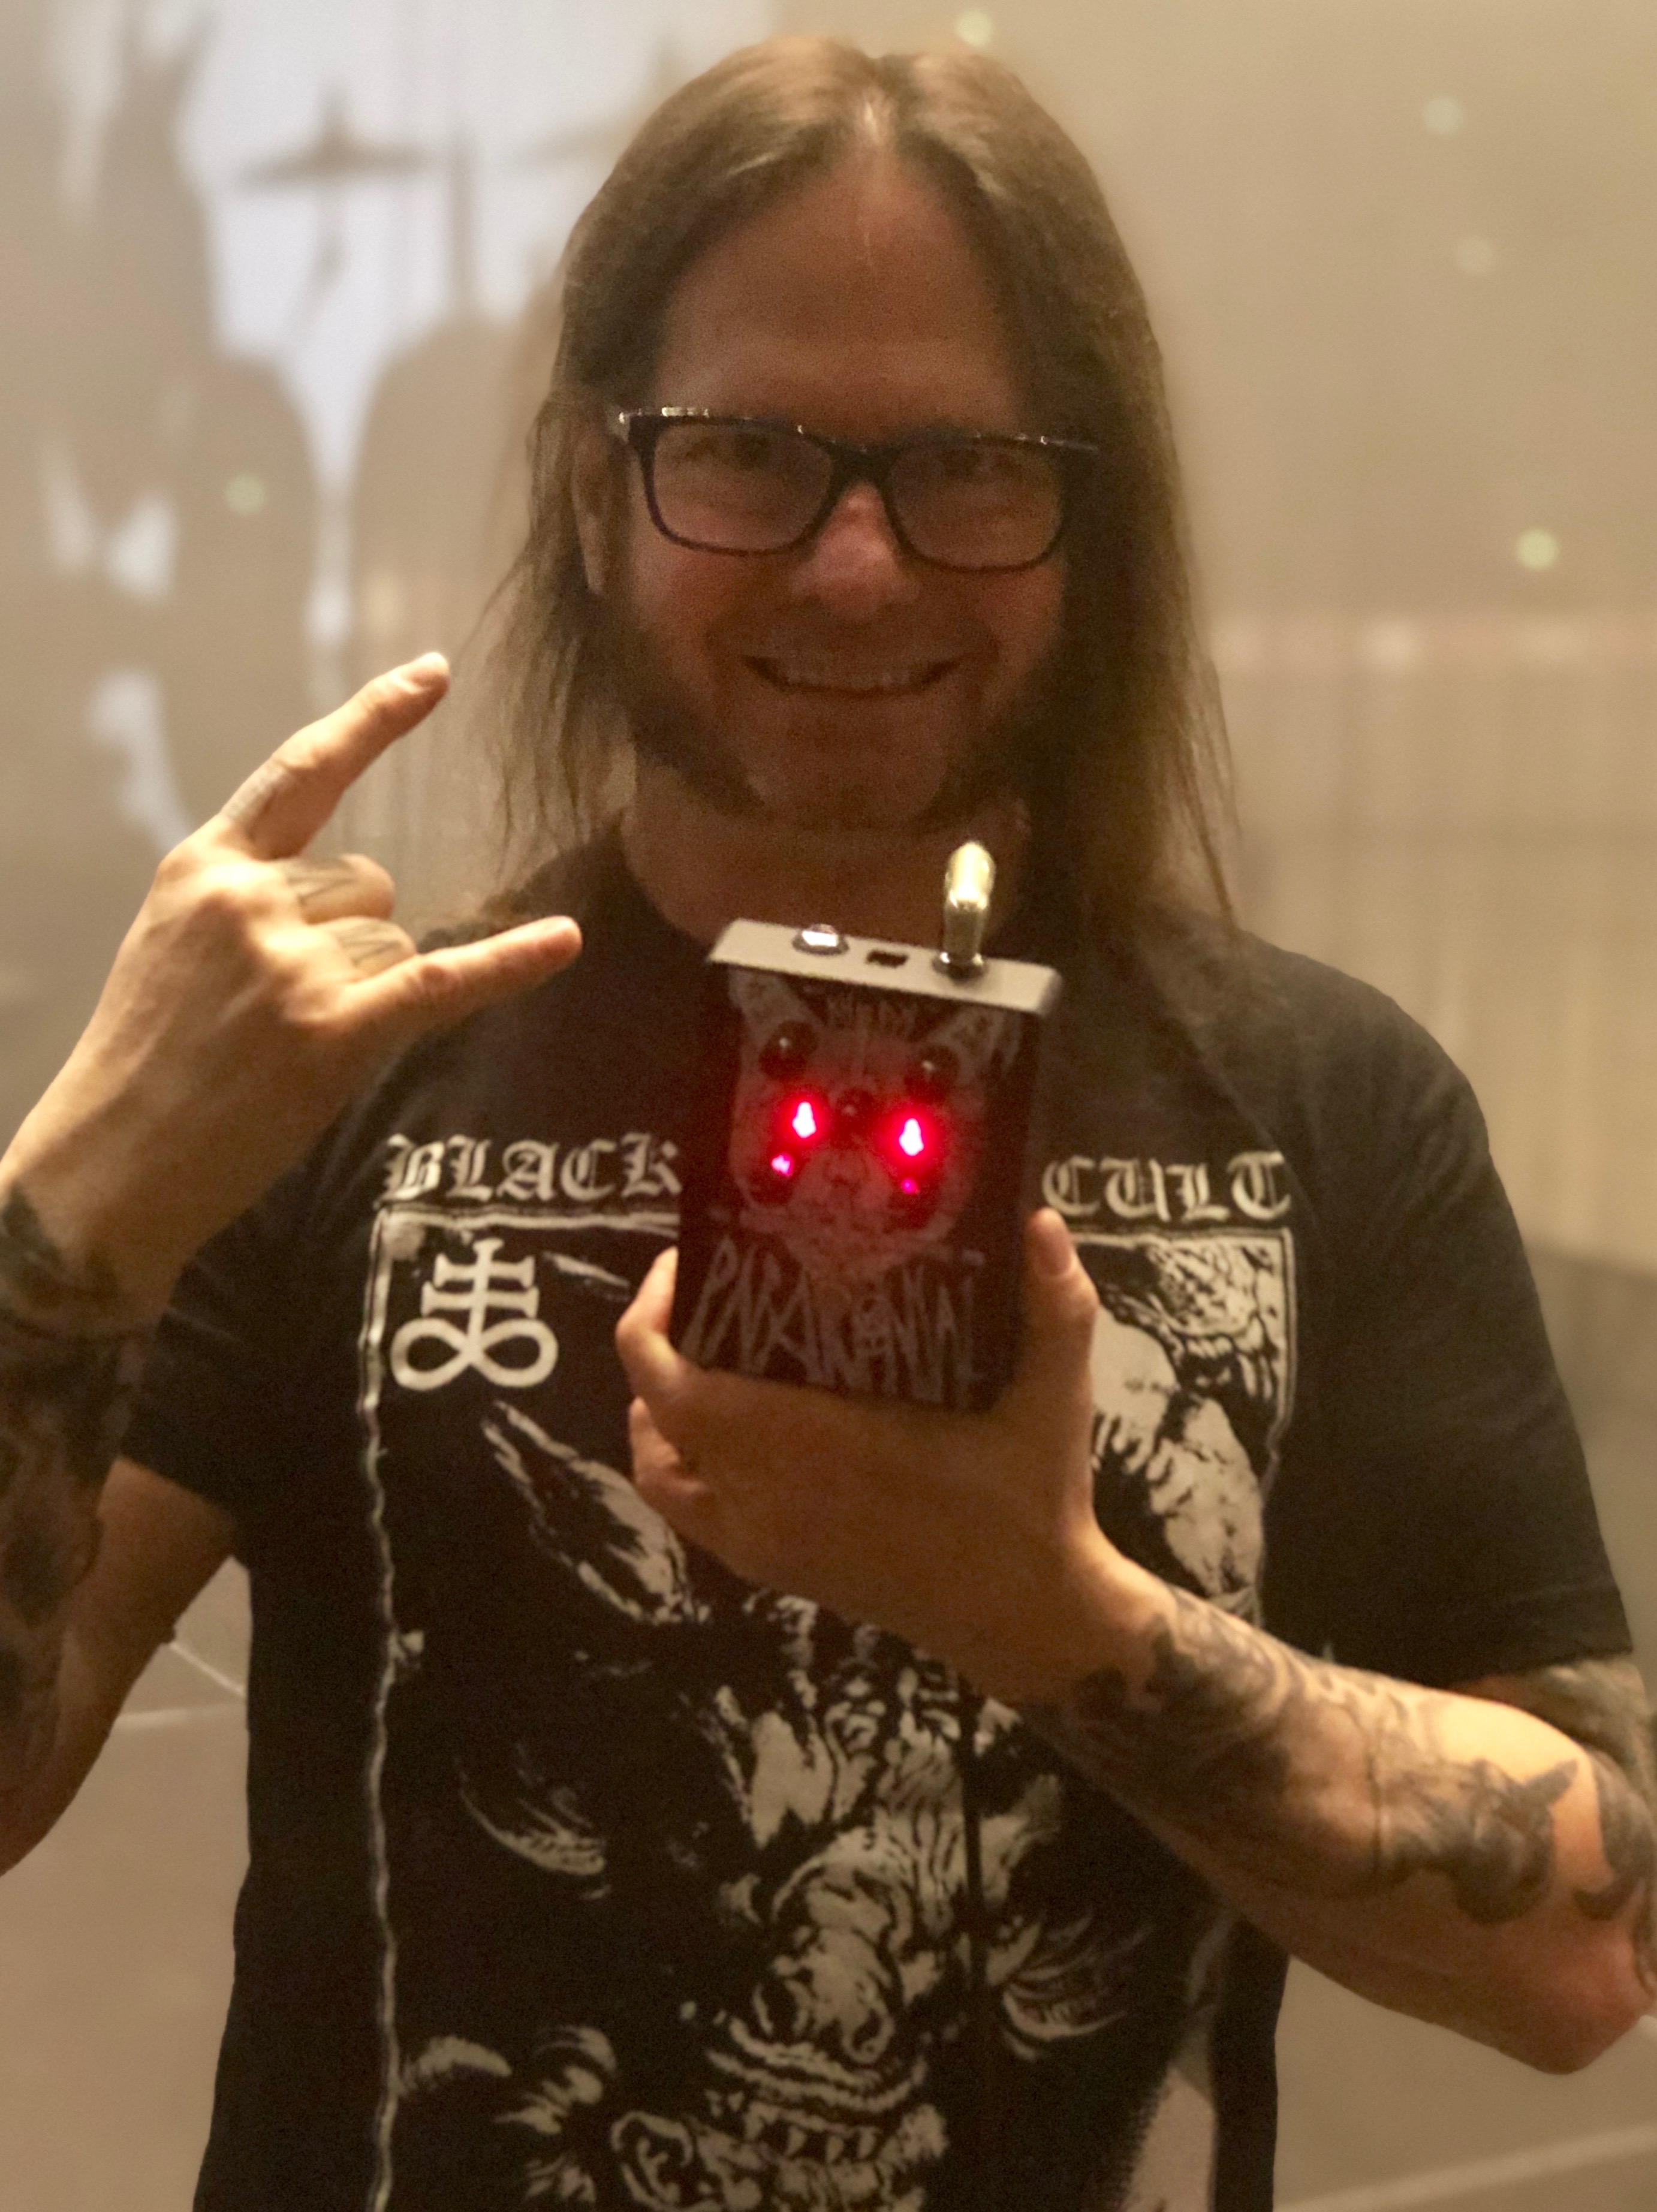 Gary holt with Paranormal pedal by KHDK